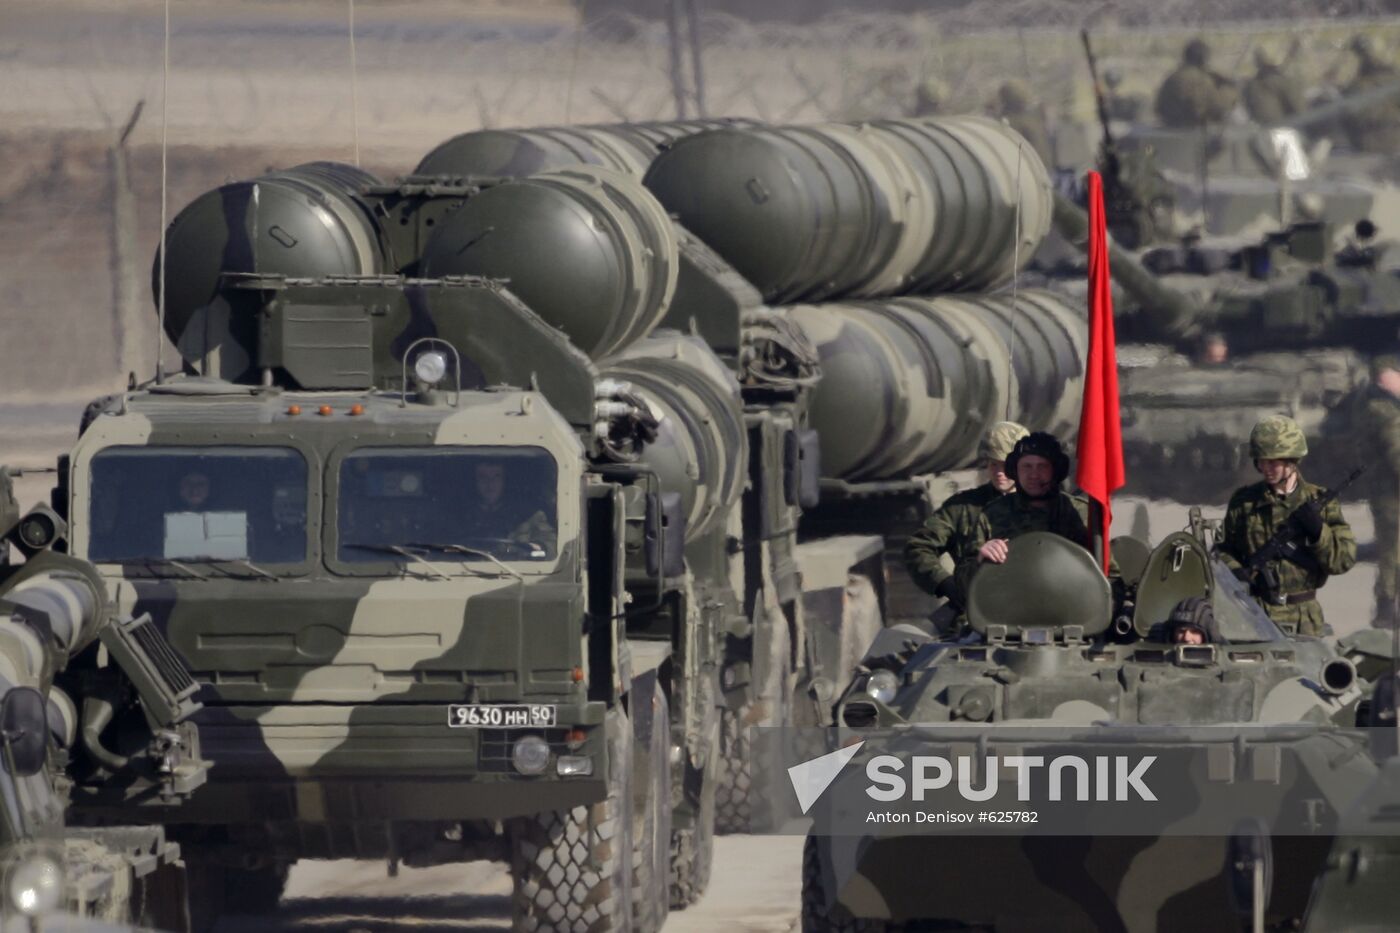 S-400 ani-aircraft missile system launchers